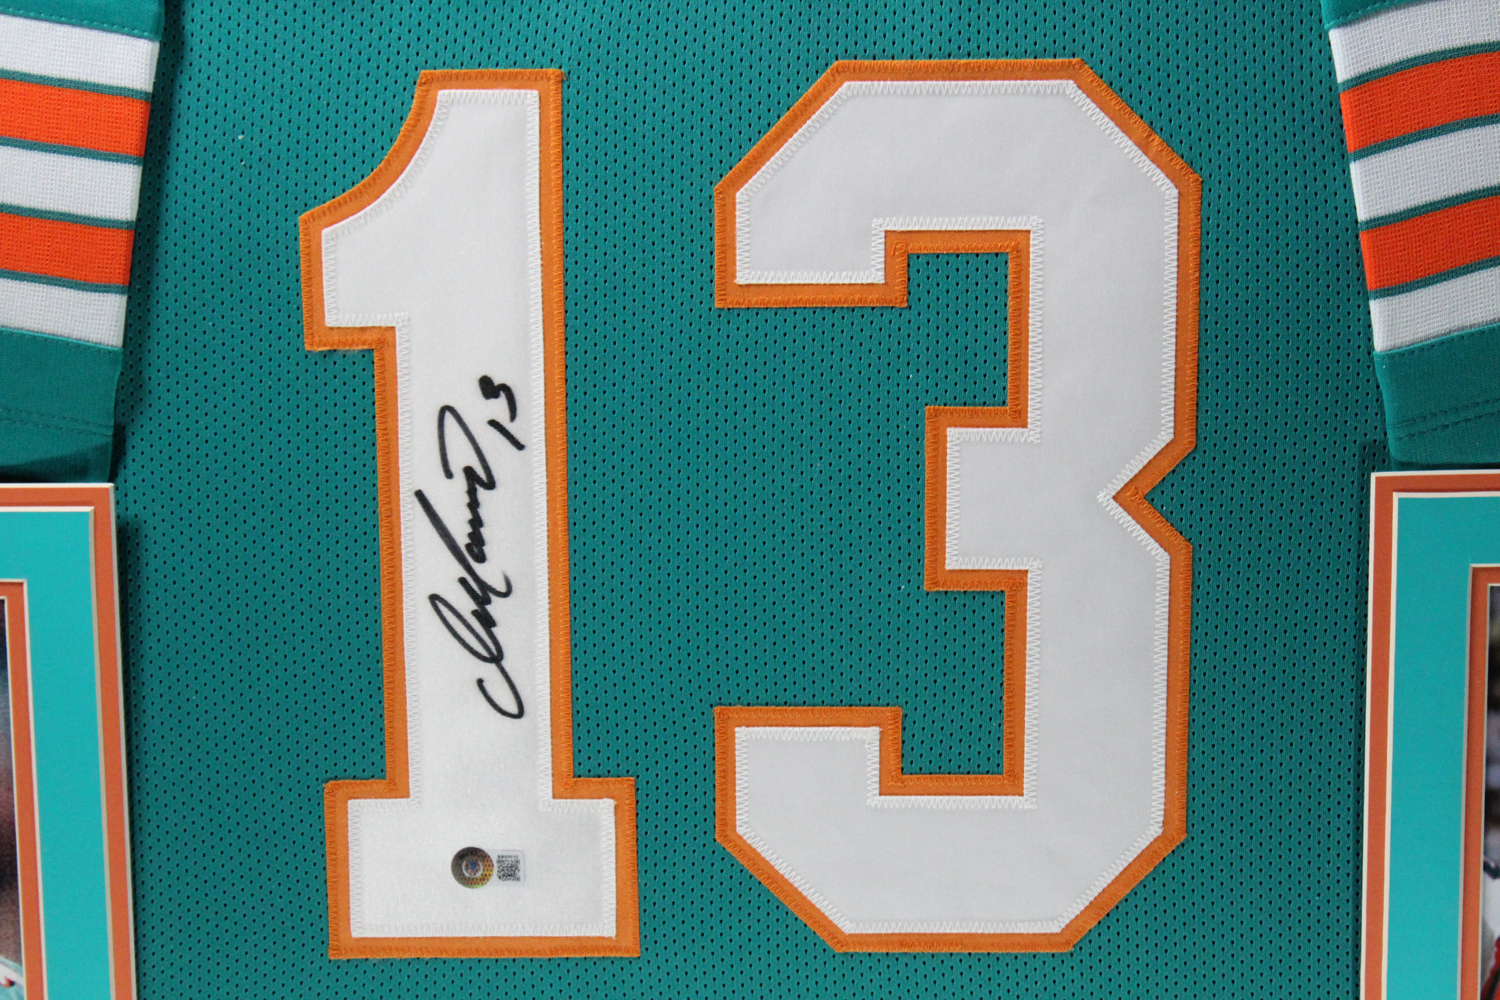 Dan Marino Autographed/Signed Pro Style Framed Teal XL Jersey Beckett